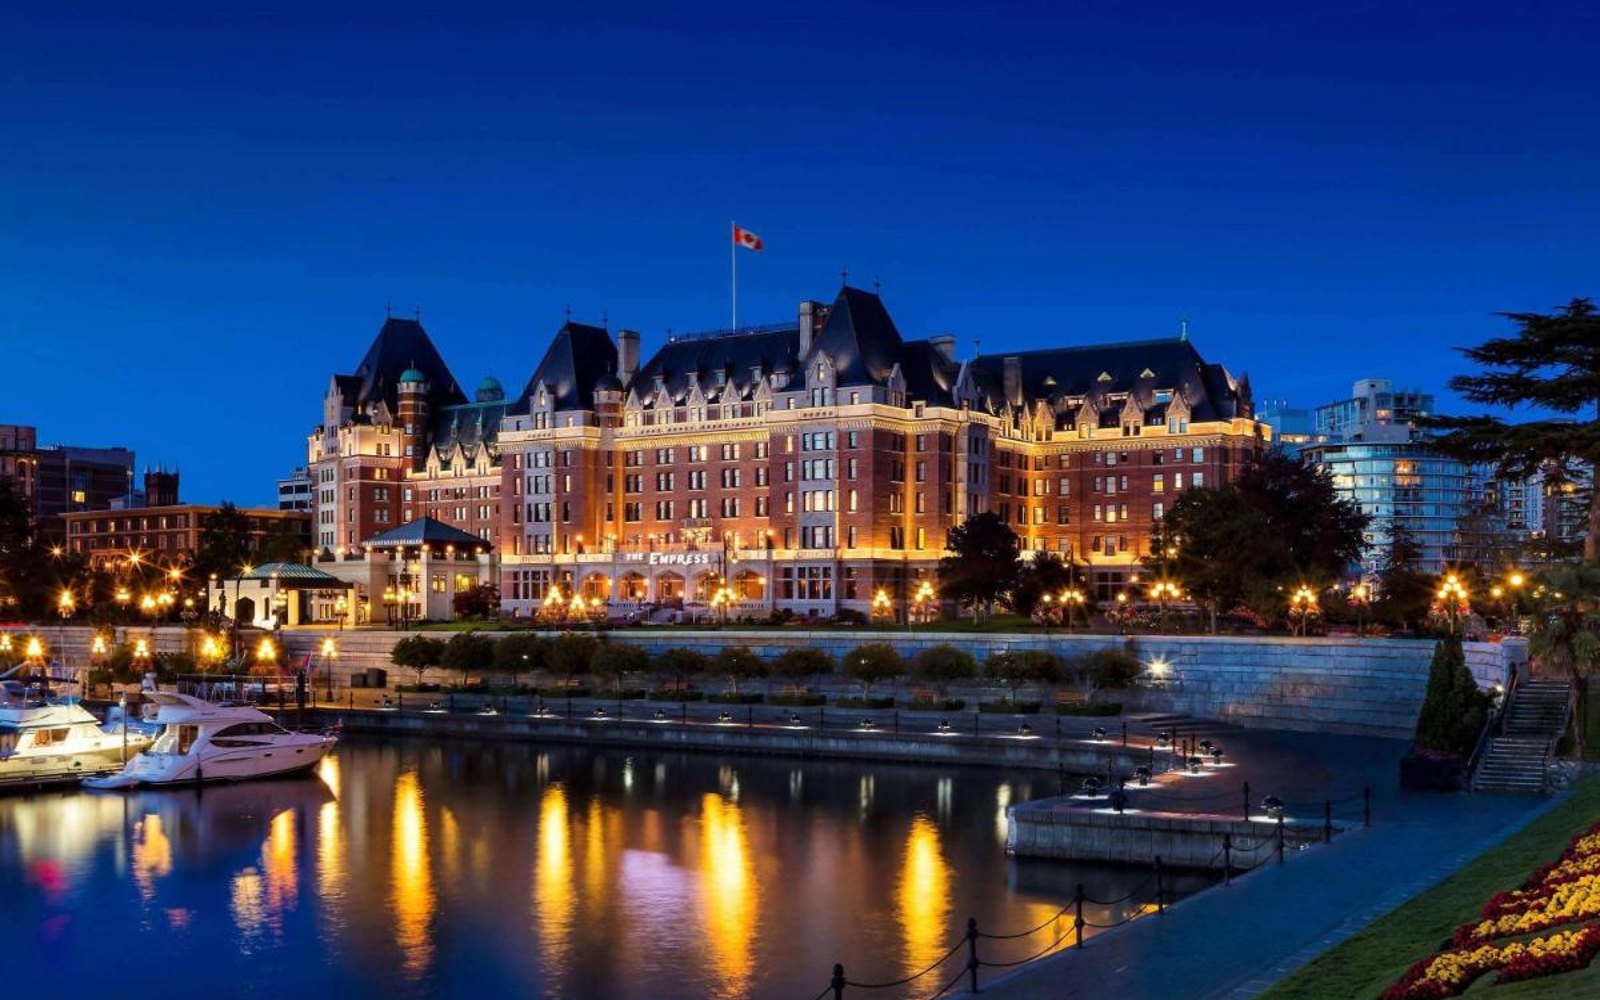 the fairmont empress hotel, one of the best hotels in victoria